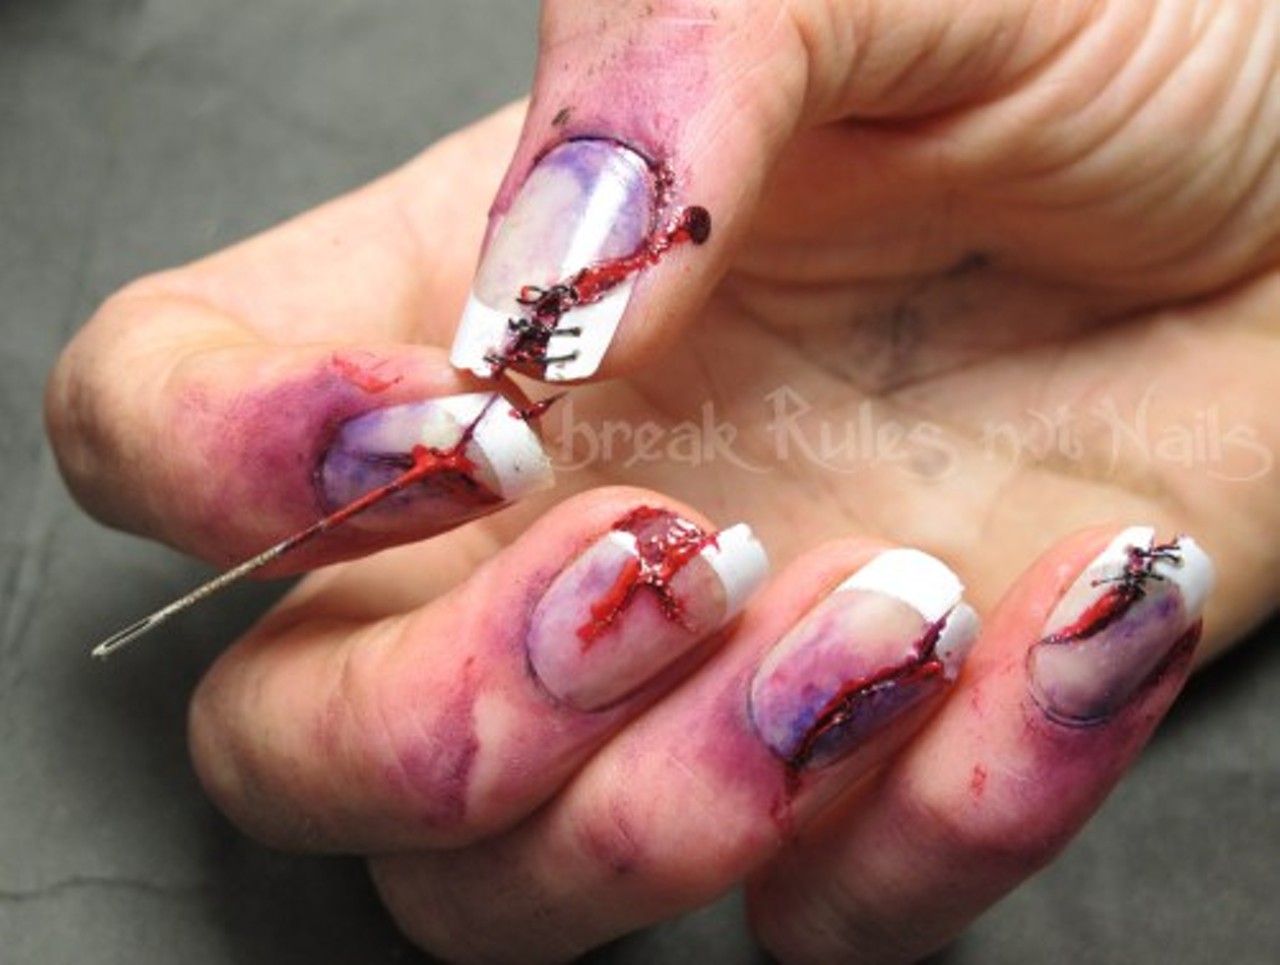 Zombie nails by @breakrulesnotnails